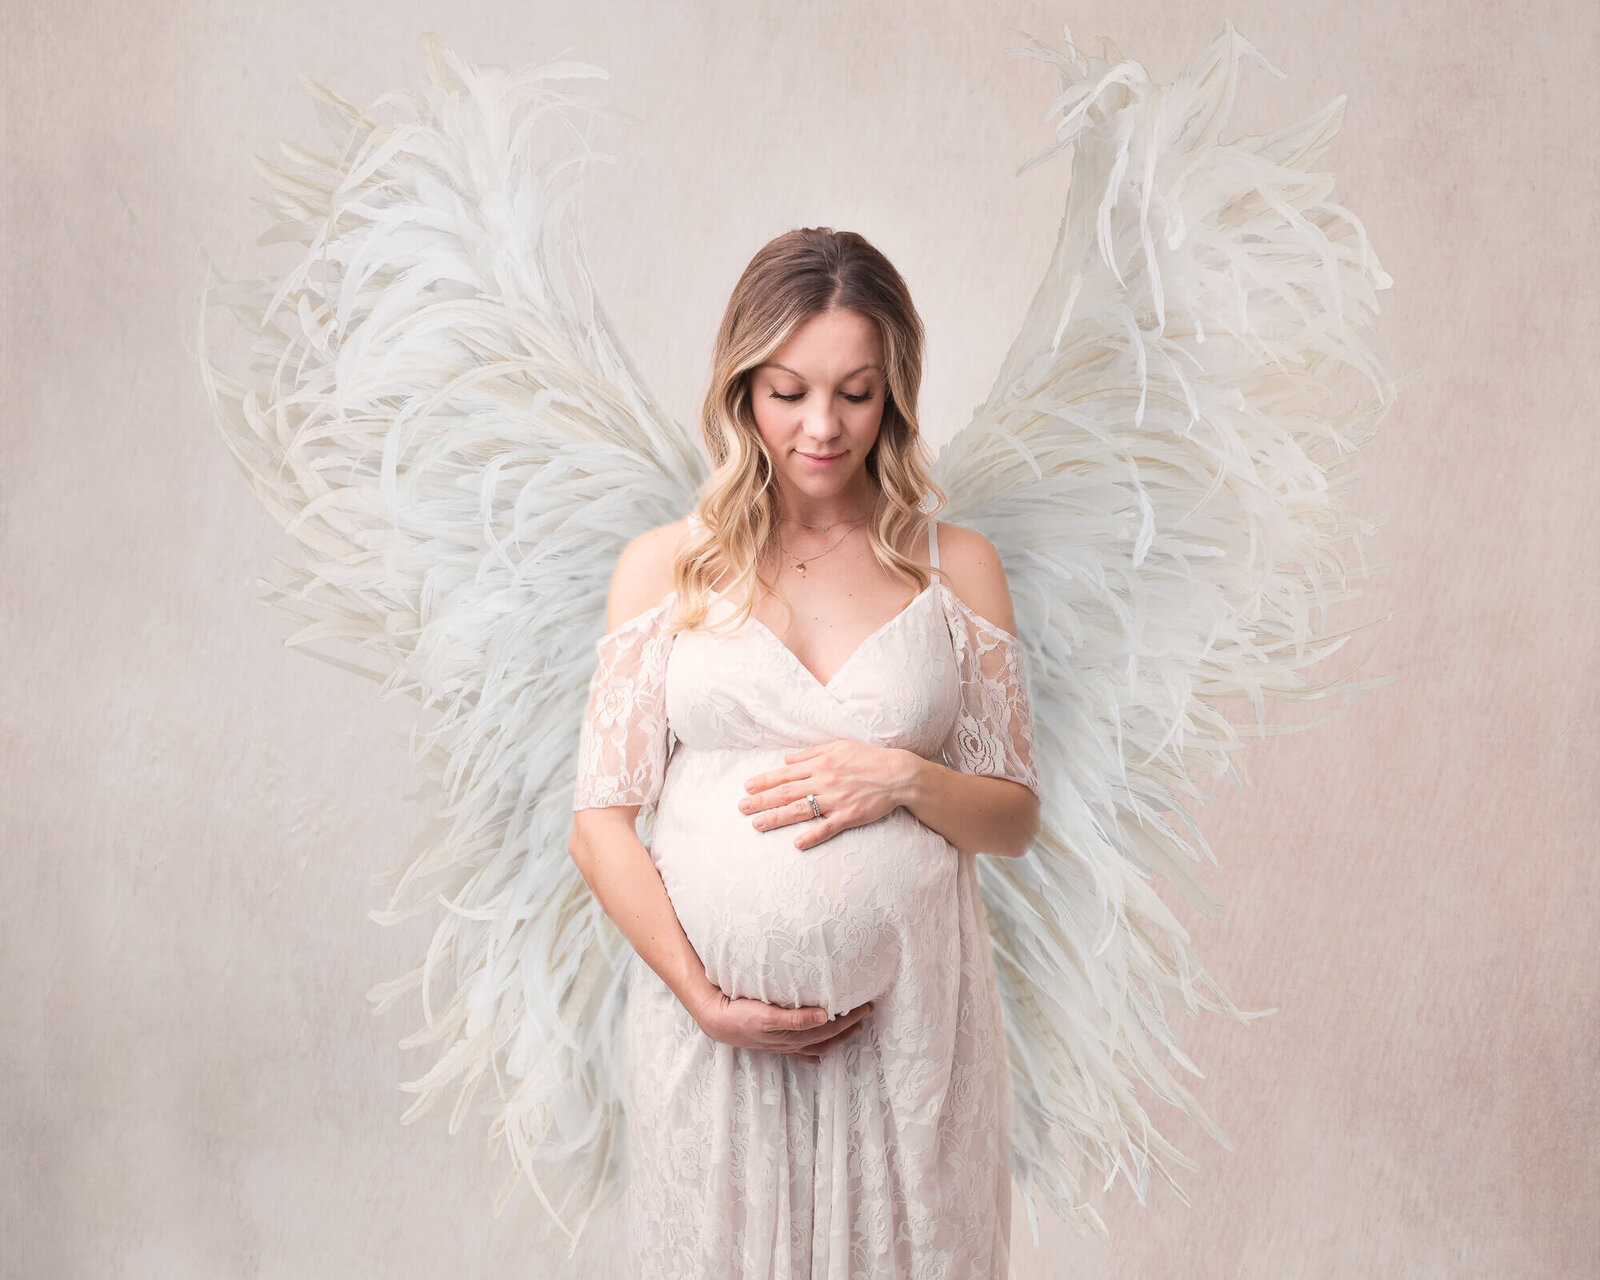 Maternity picture, woman with angel wings